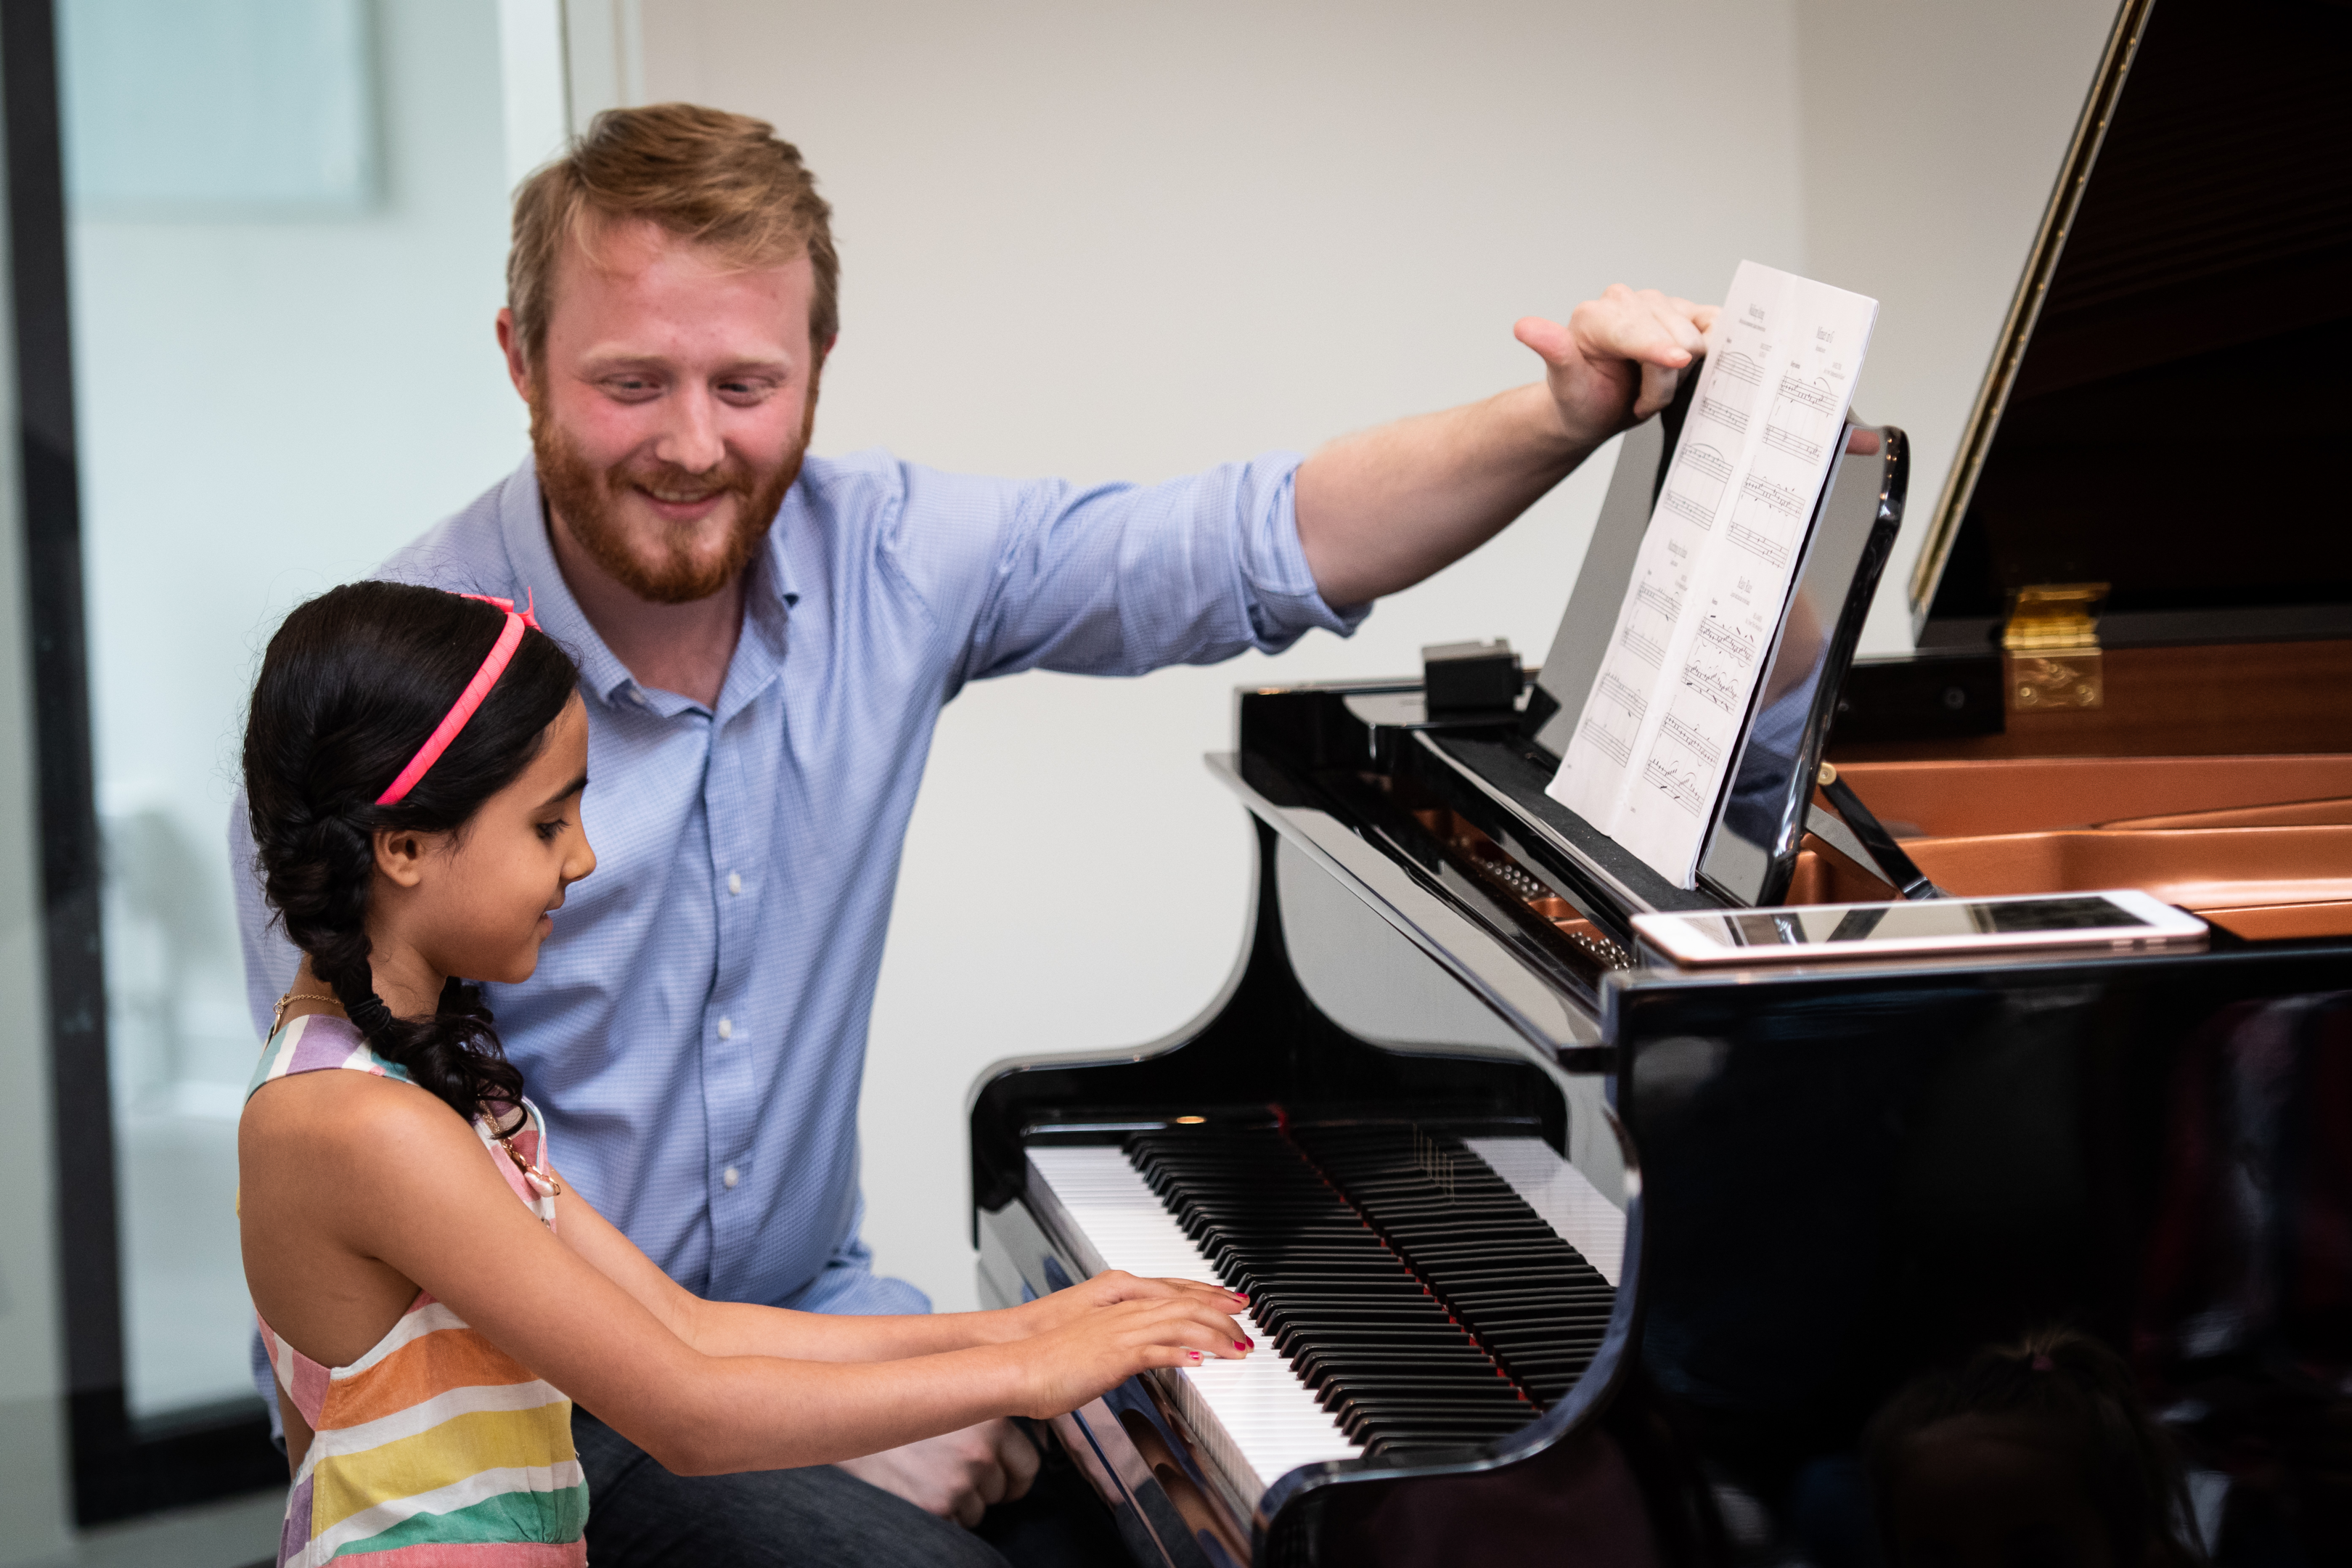 Winning the Practice Battle: Getting Kids to Practice Music Without Pushing Too Hard